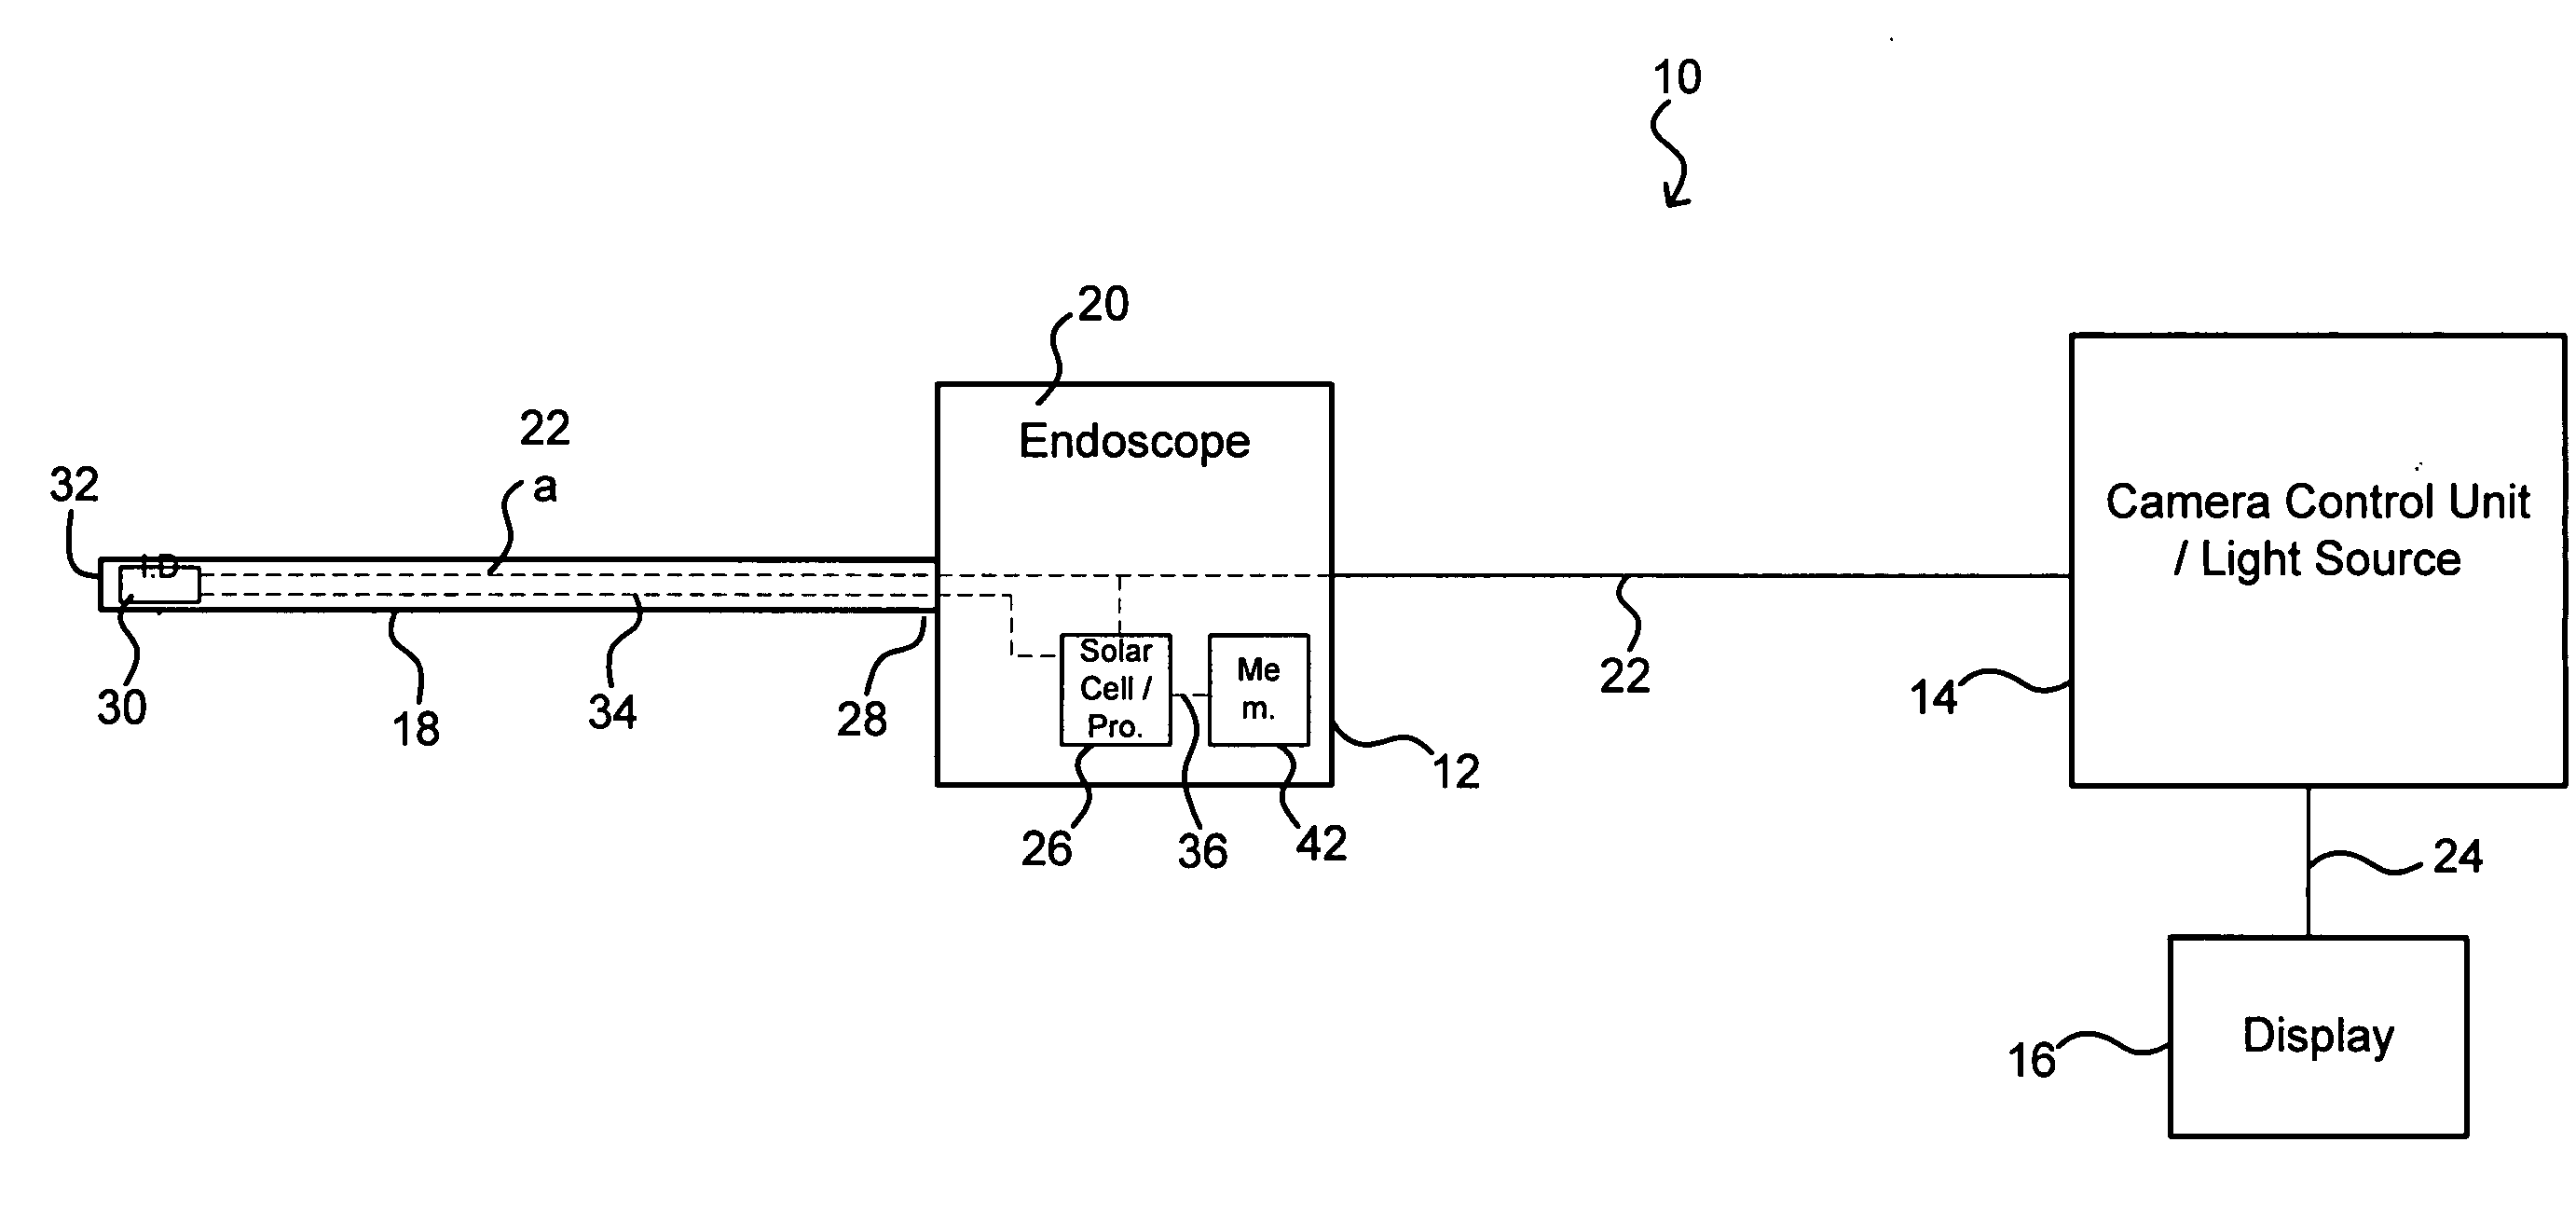 Optically coupled endoscope with microchip